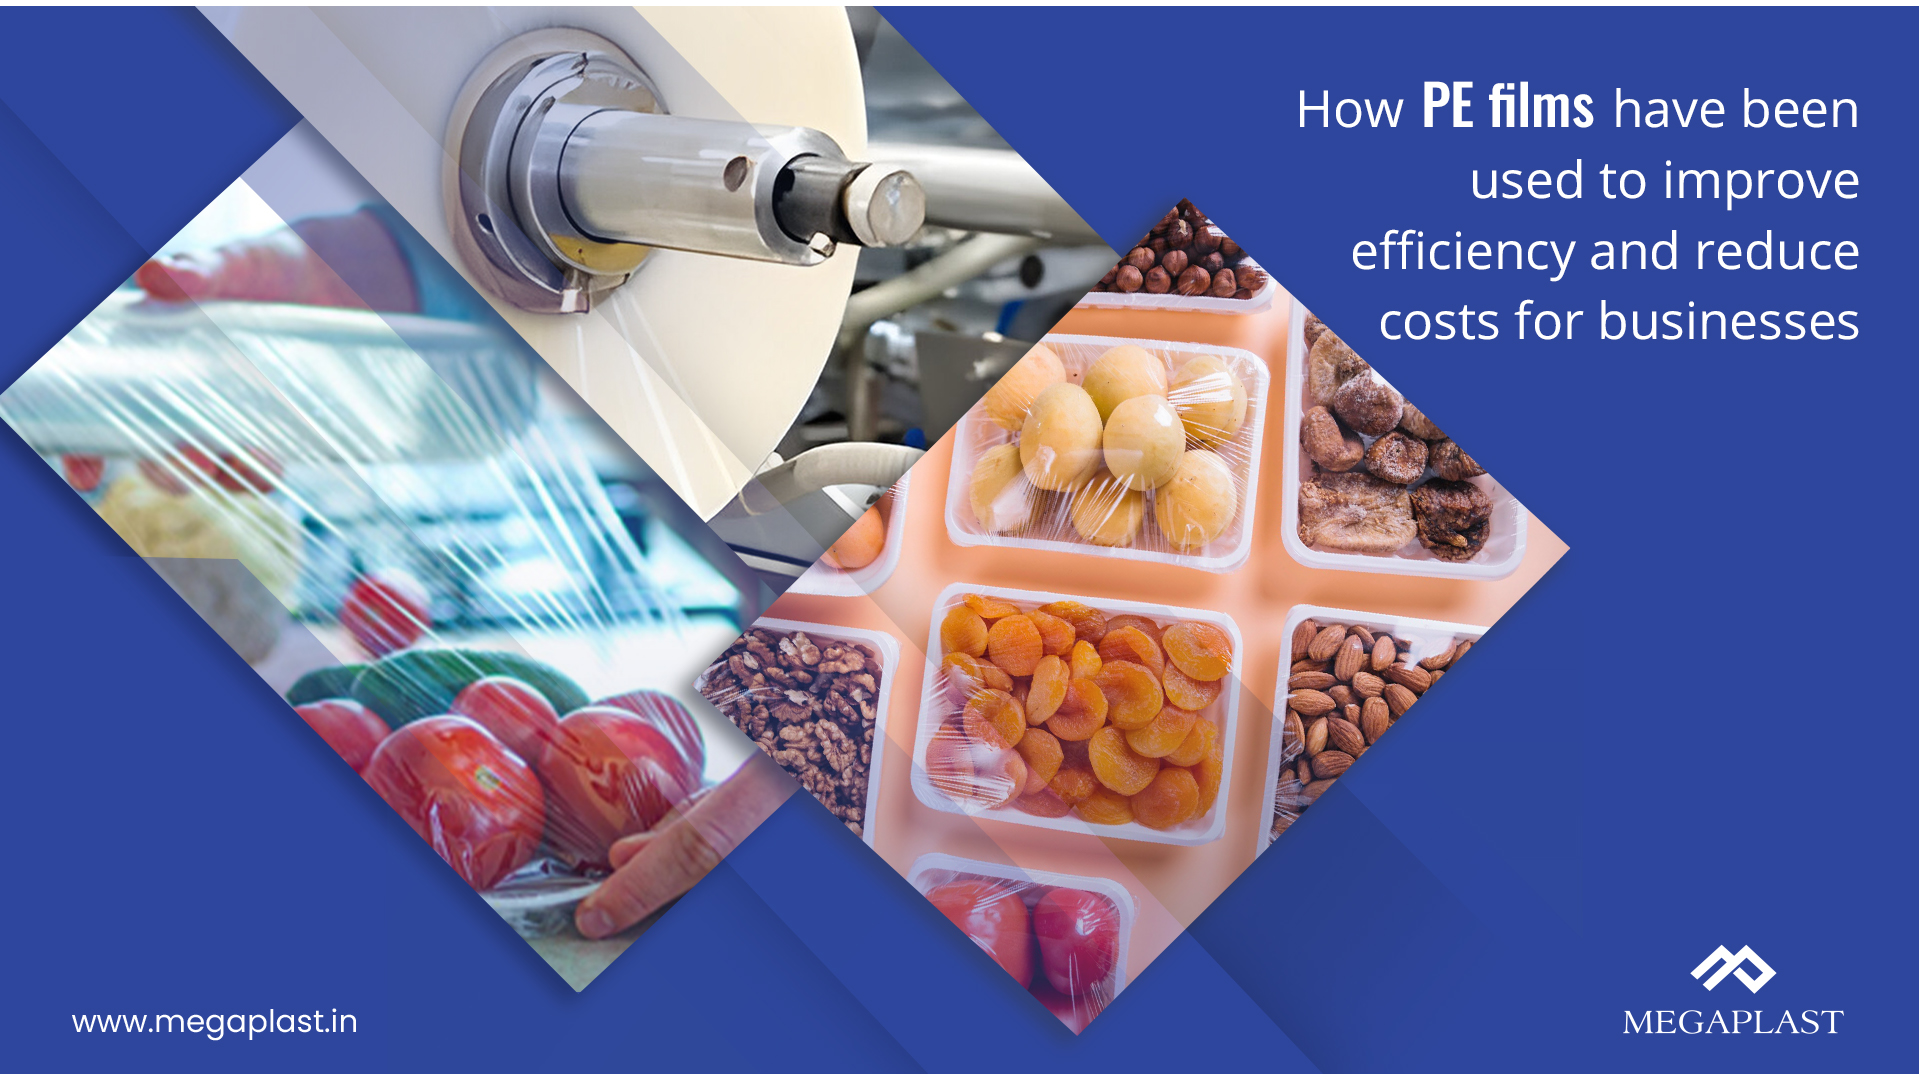 How PE films have been used to improve efficiency and reduce costs for businesses